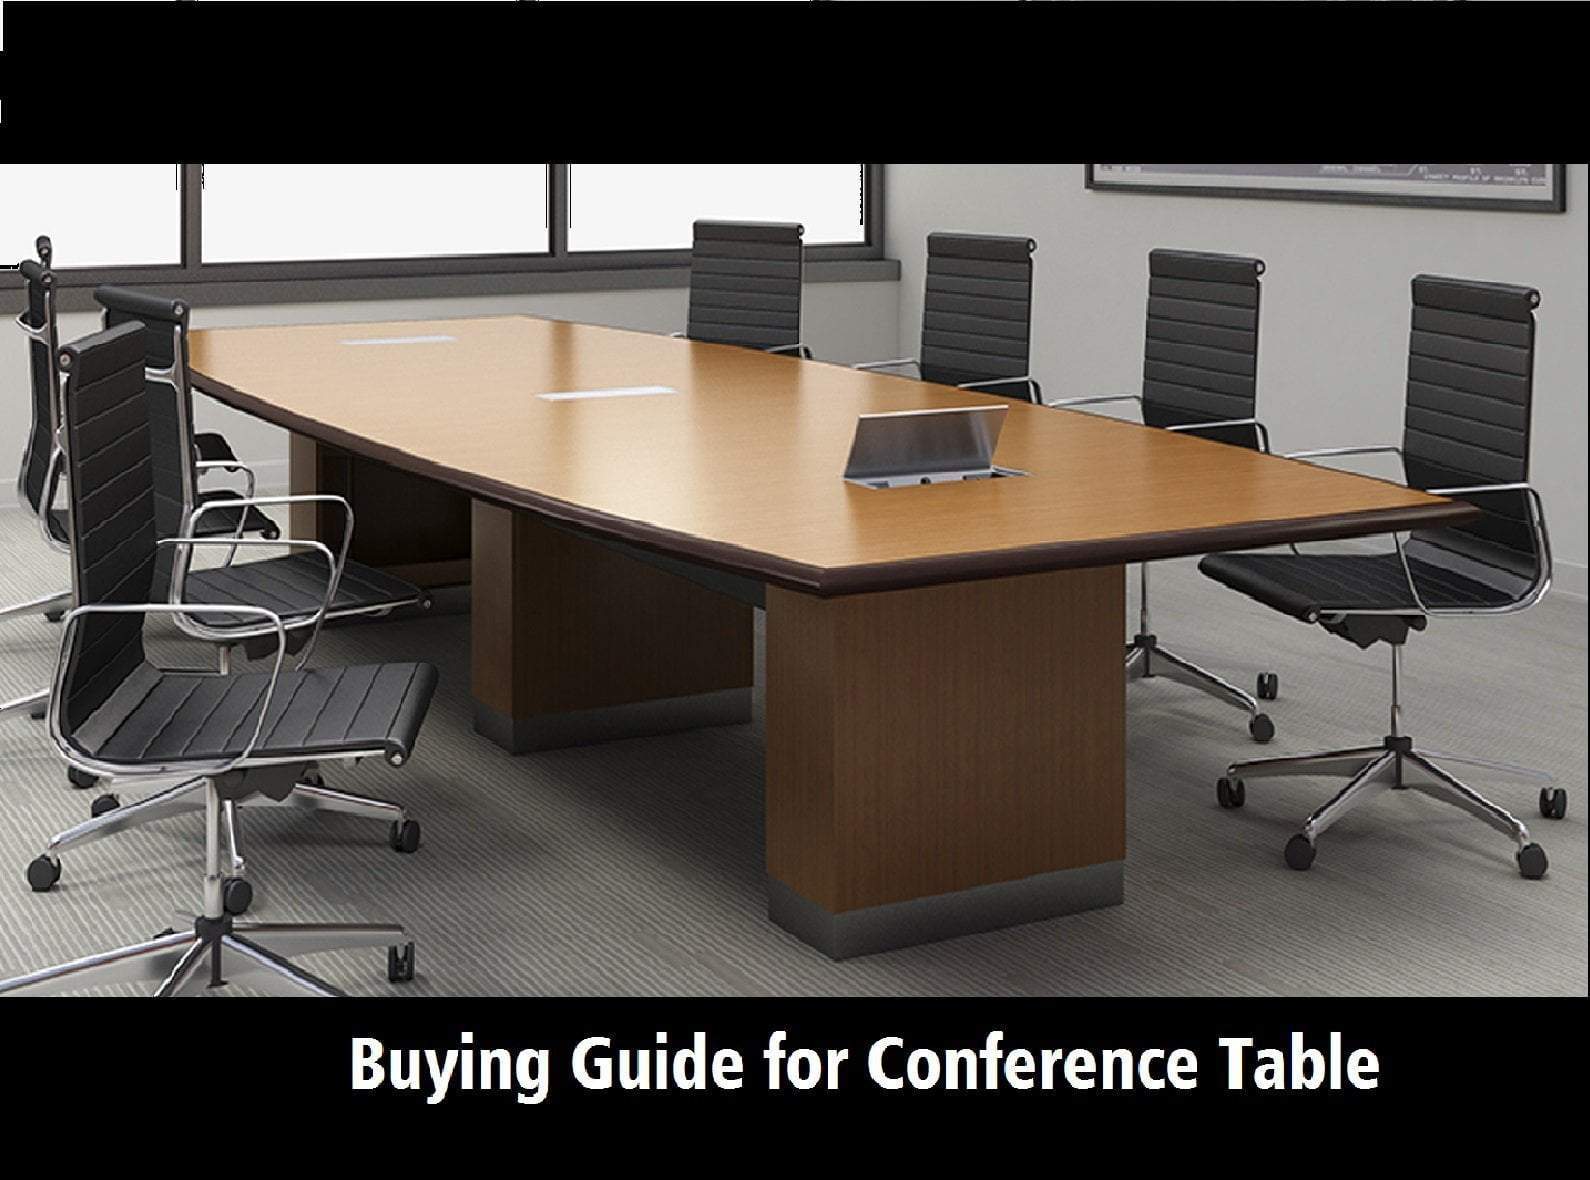 HOG buying guide for conference tables